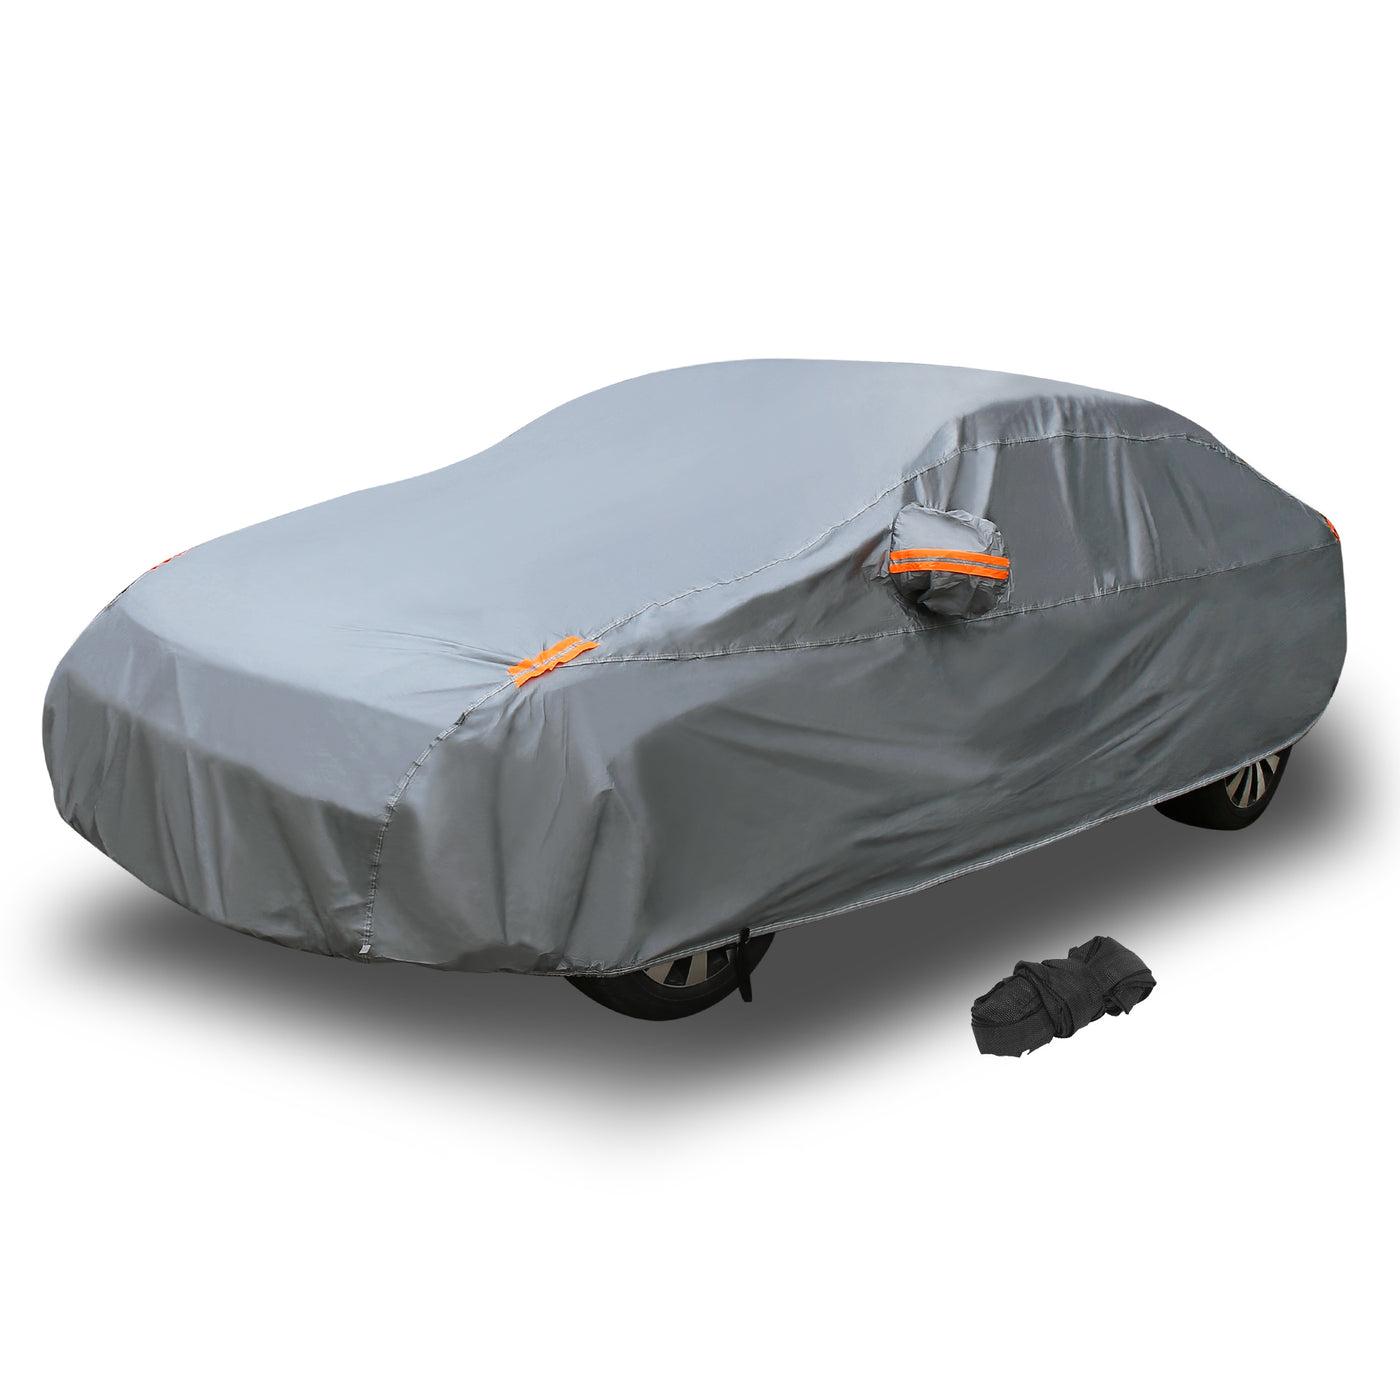 X AUTOHAUX Full Car Cover Soft Lining Universal Fit Sedan Outdoor All Weather Sun Protection Waterproof Dustproof Snowproof Windproof Scratch Resistant w/ Storage Bag PEVA